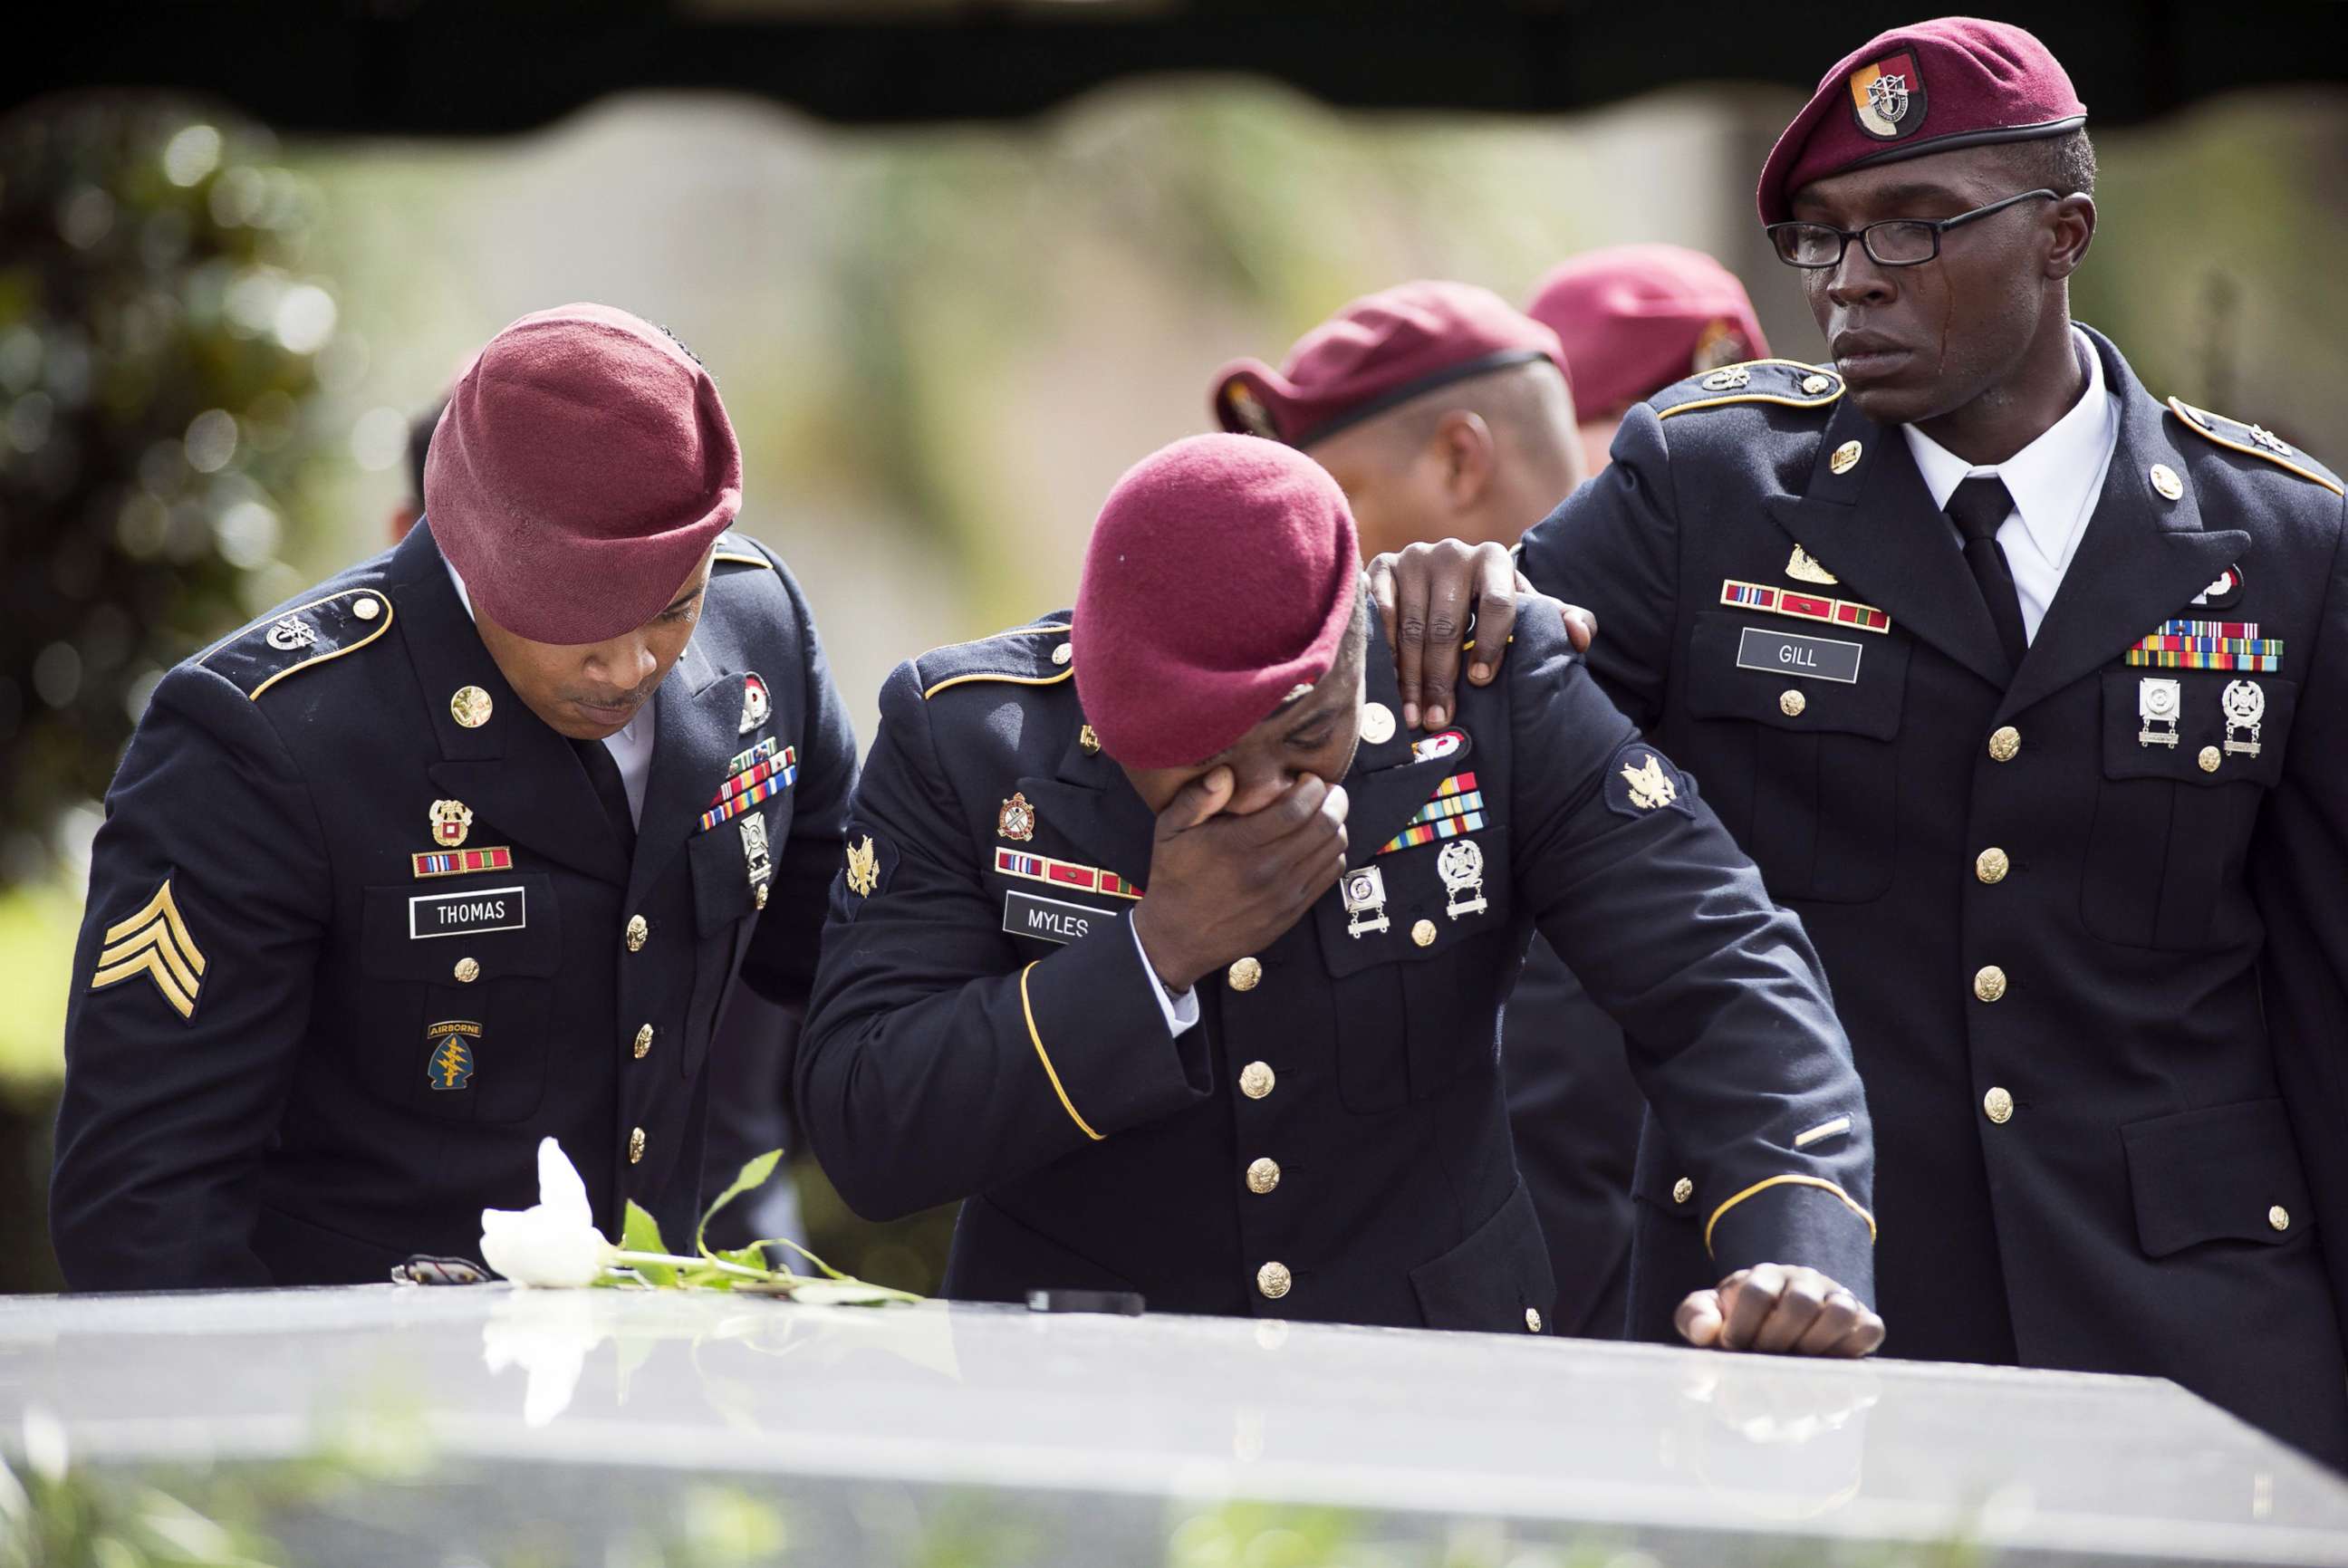 PHOTO: Members of the 3rd Special Forces Group, 2nd battalion, cry at the tomb of U.S. Army Sgt. La David Johnson at his burial service in the Memorial Gardens East cemetery on Oct. 21, 2017 in Hollywood, Fla. 
